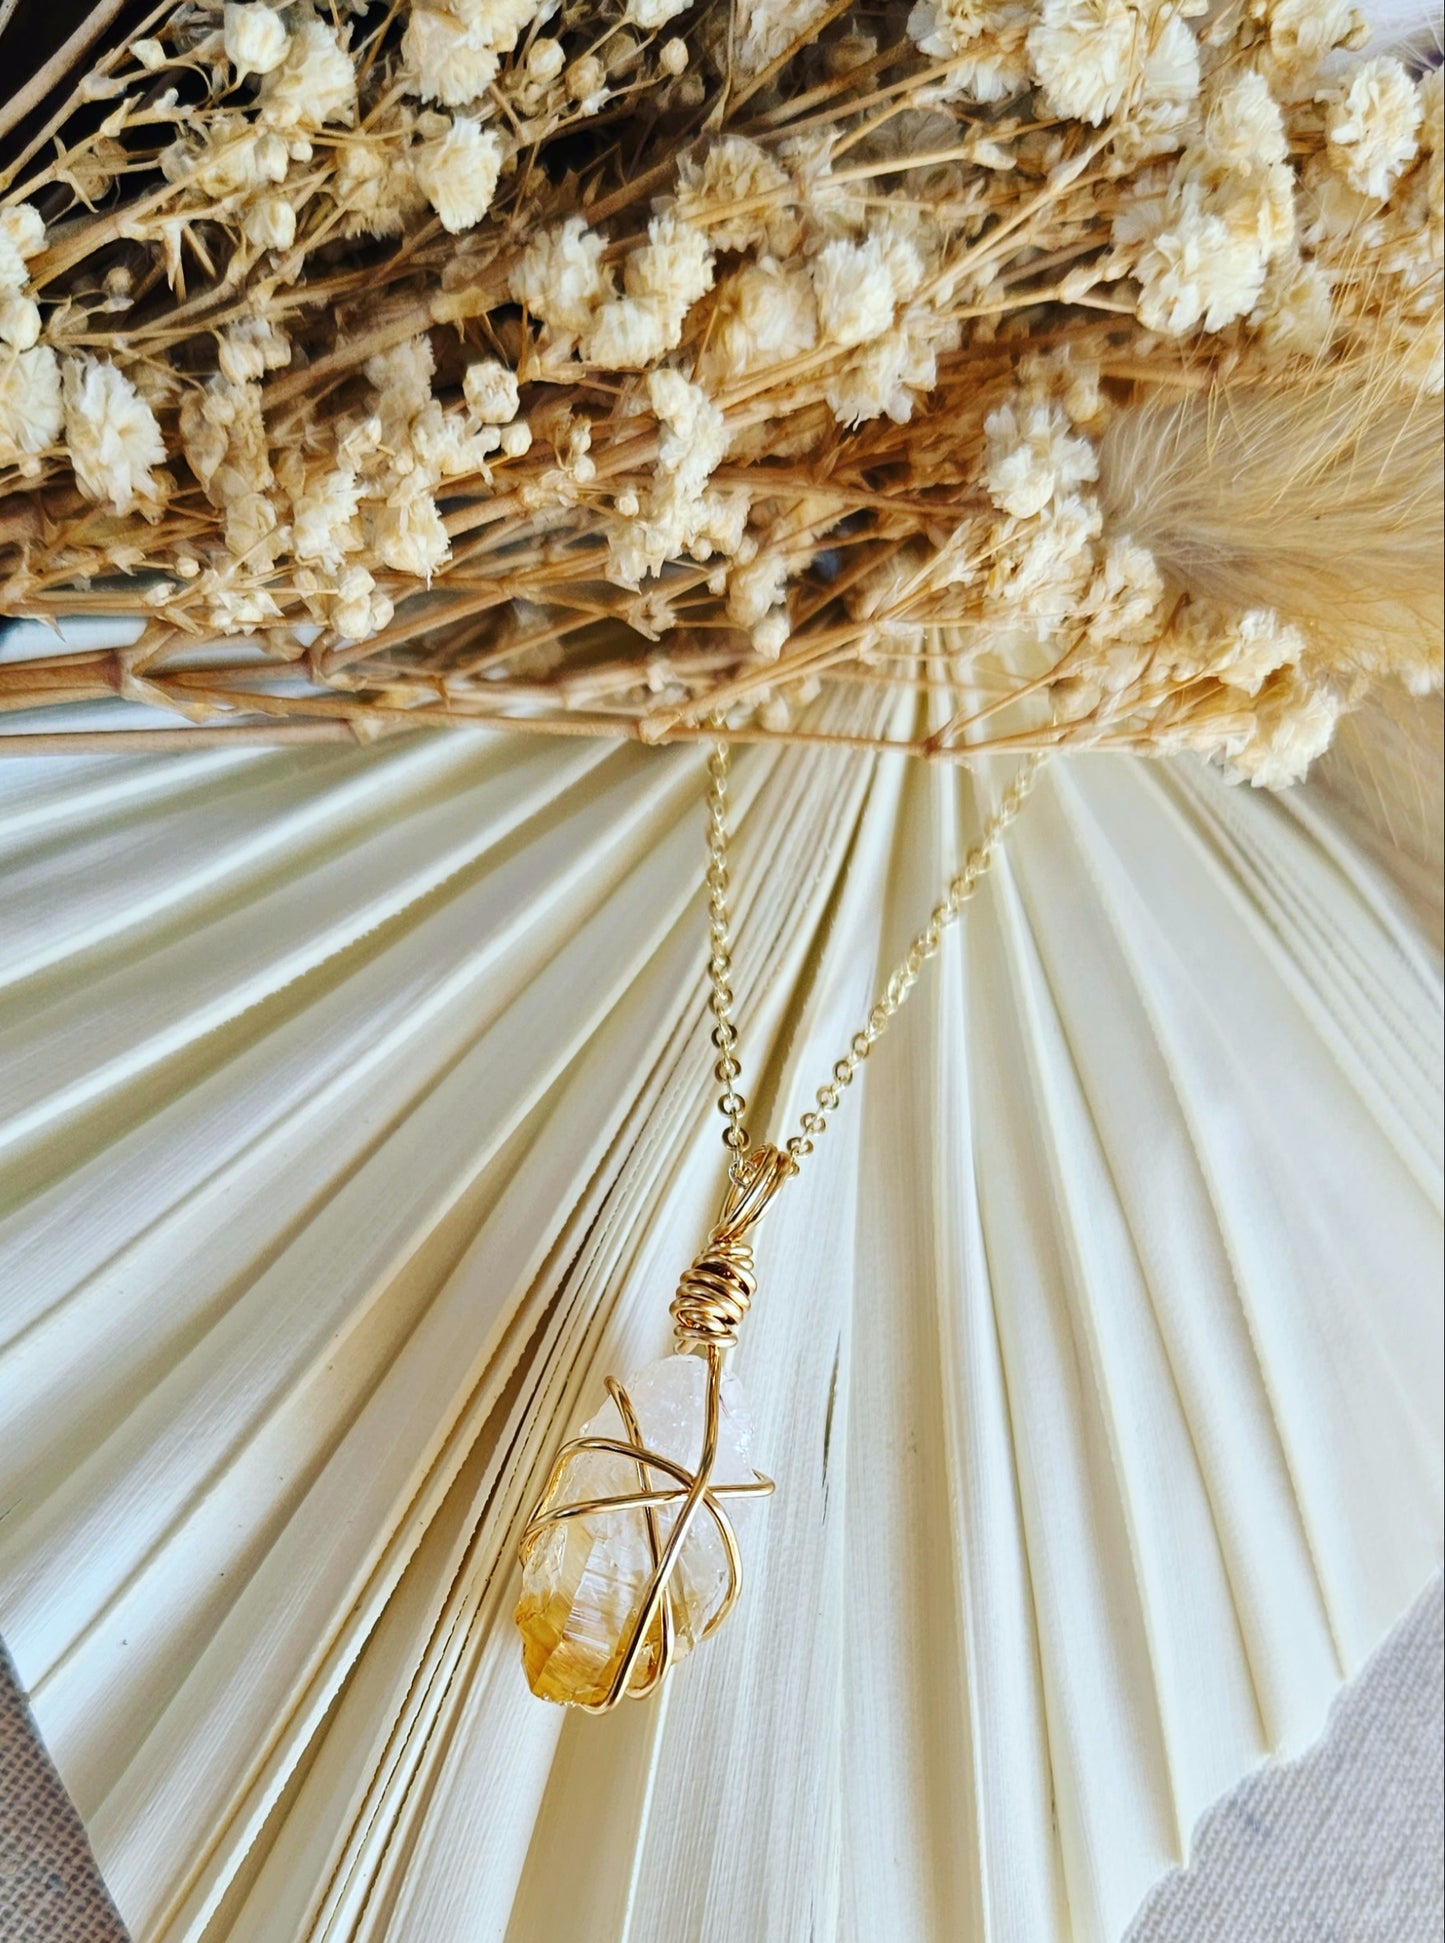 Gold Citrine Necklace